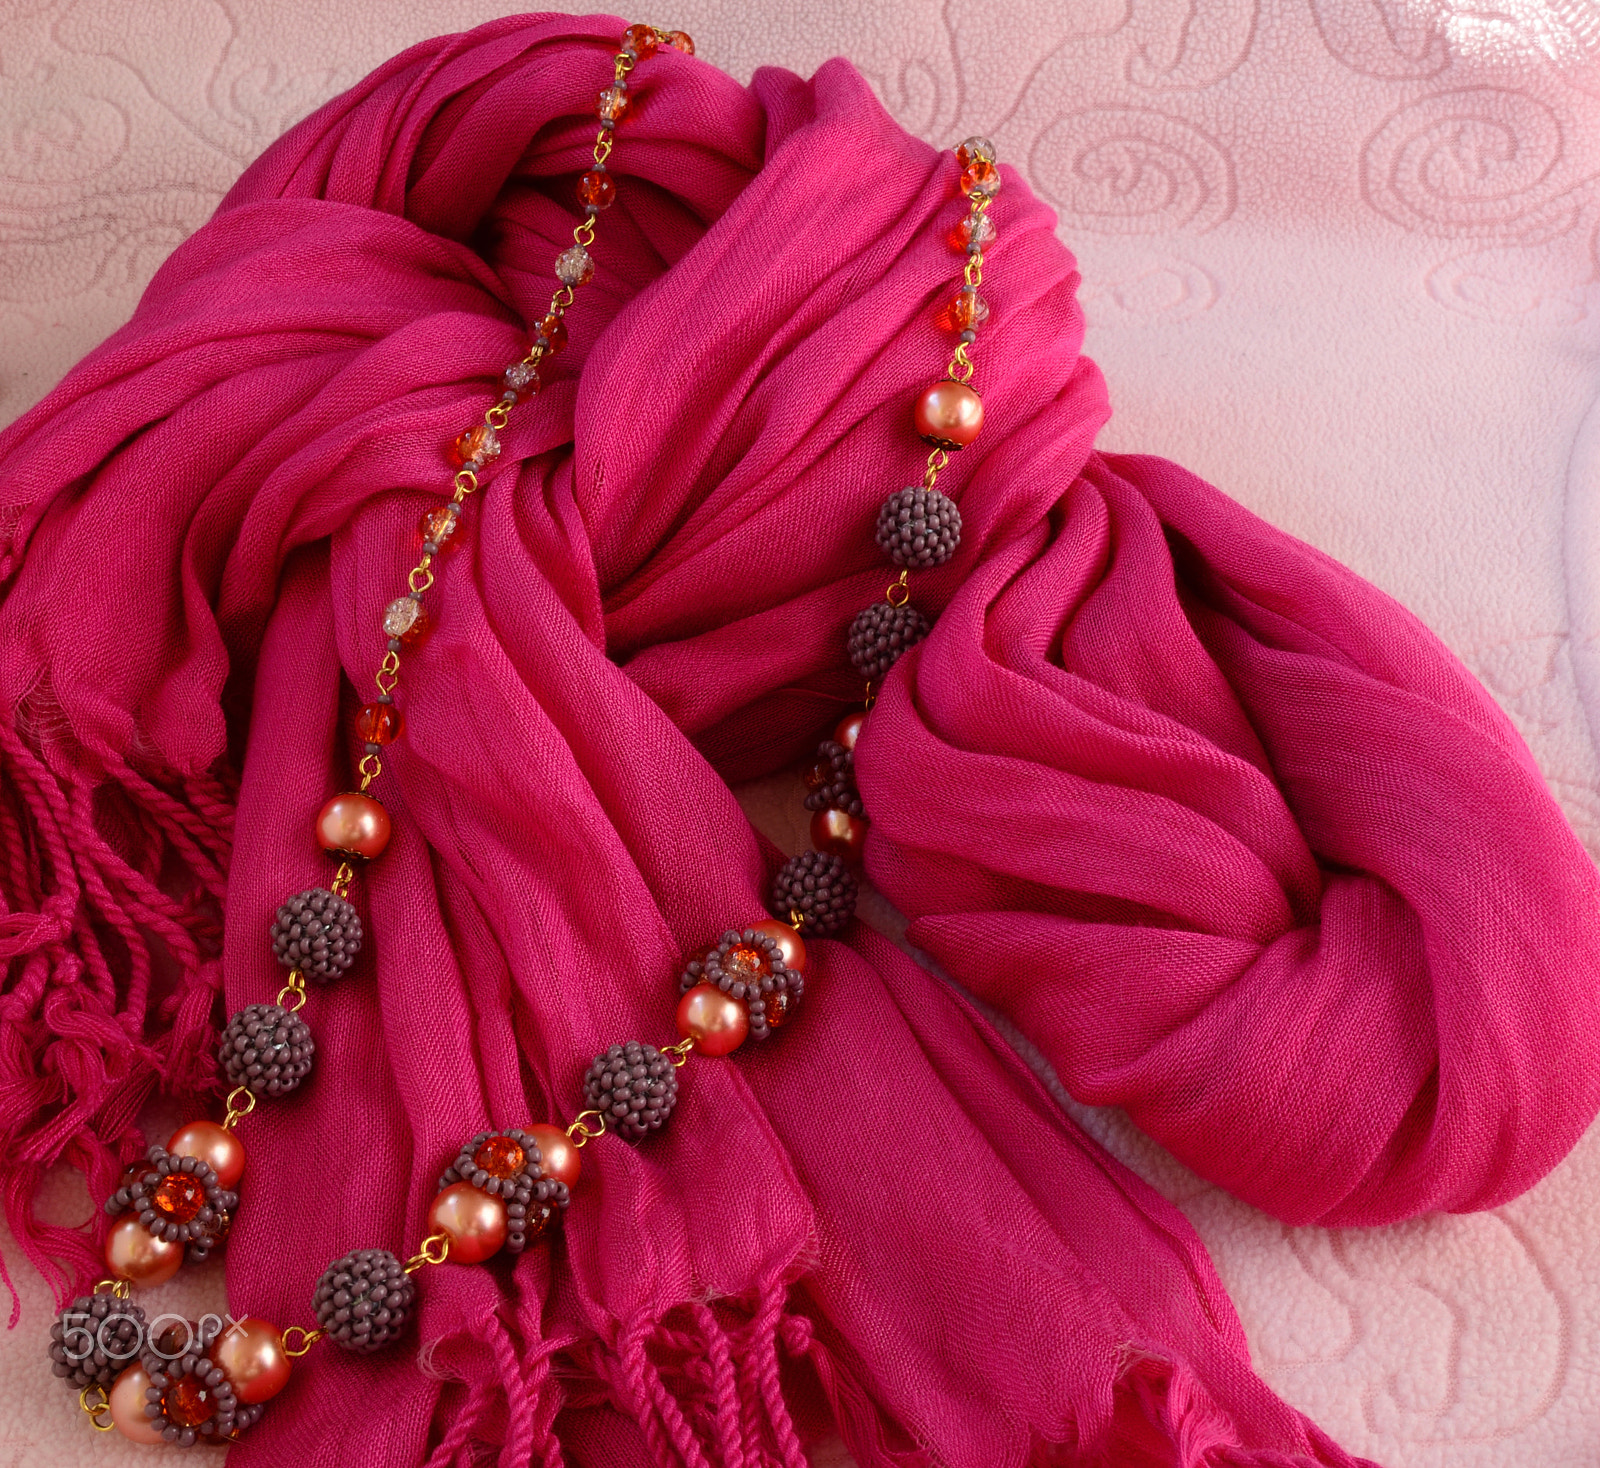 Nikon D7000 sample photo. Beautiful beaded necklace with shawl photography